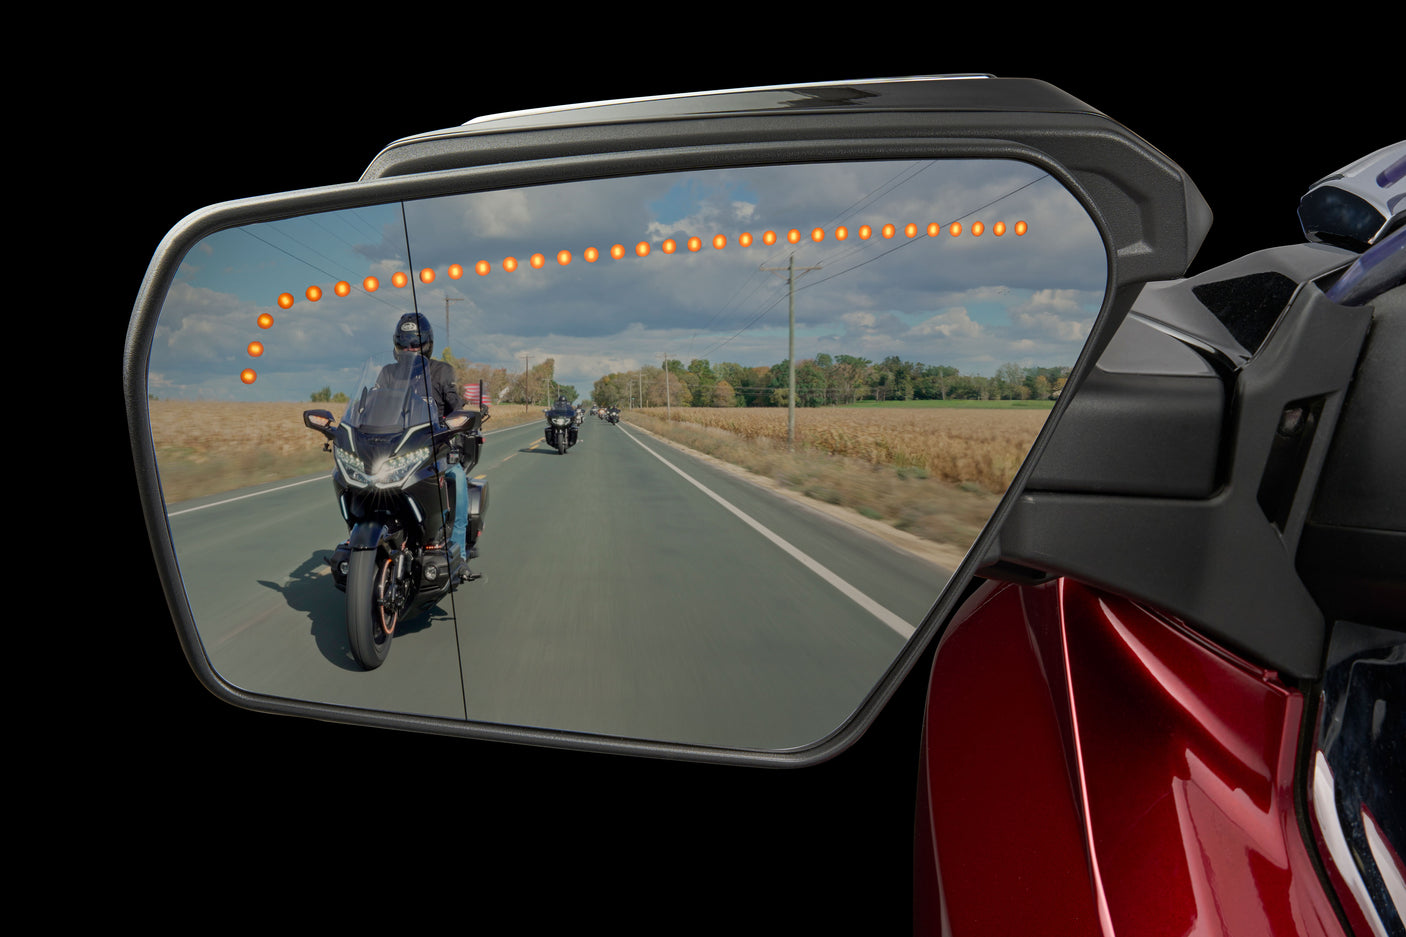 PANOVISTA Extended Convex Mirrors with Sequential Turn Signals